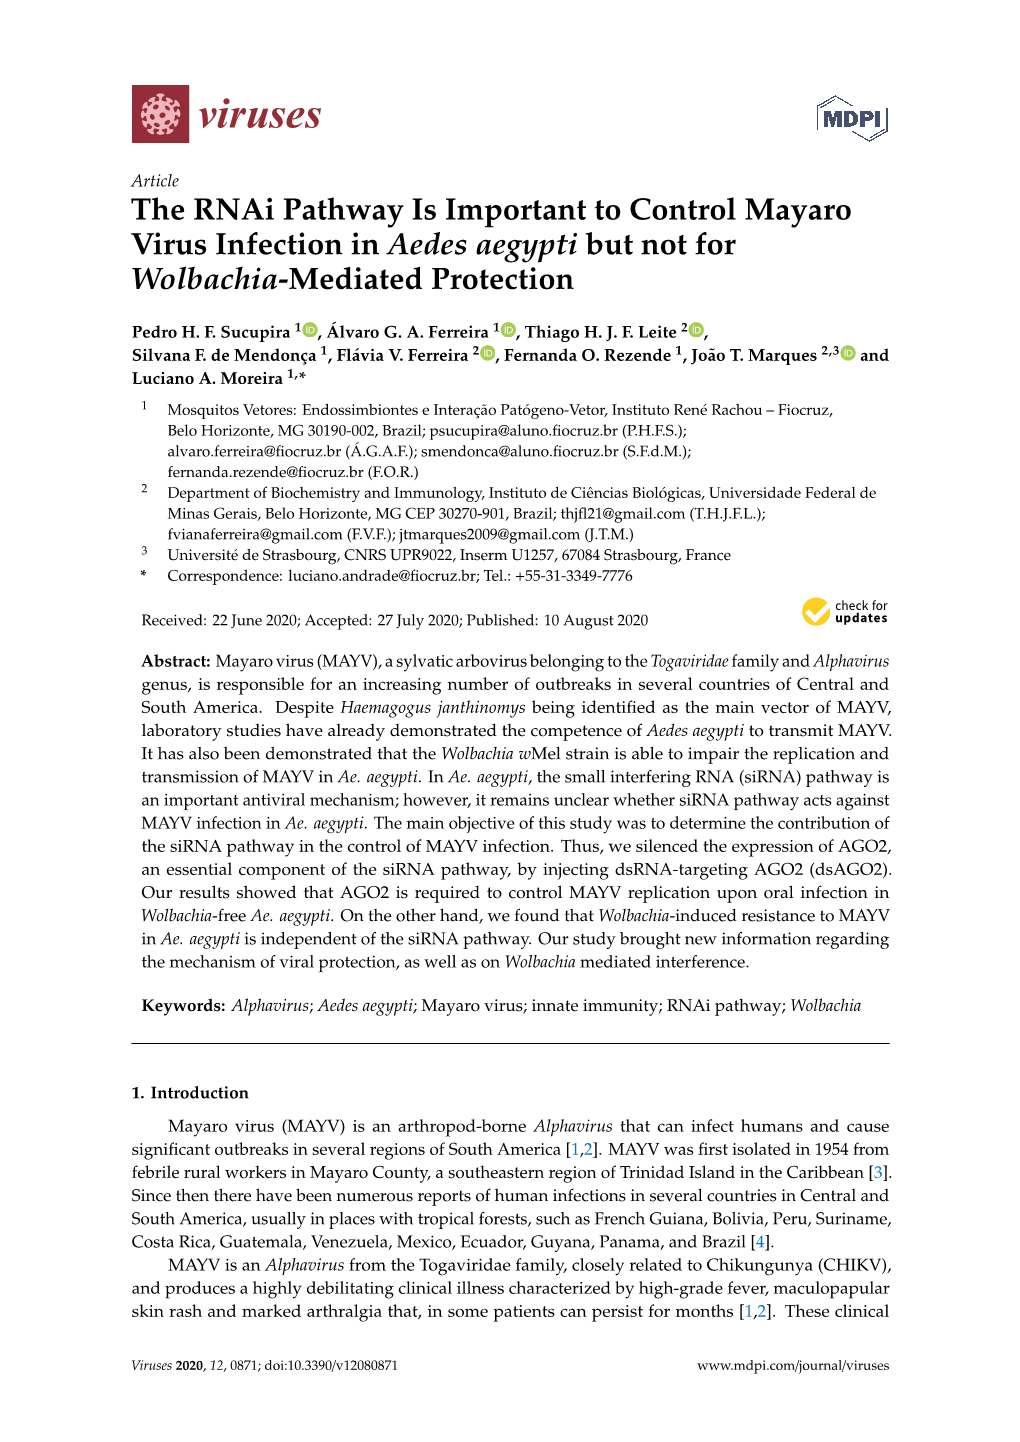 The Rnai Pathway Is Important to Control Mayaro Virus Infection in Aedes Aegypti but Not for Wolbachia-Mediated Protection